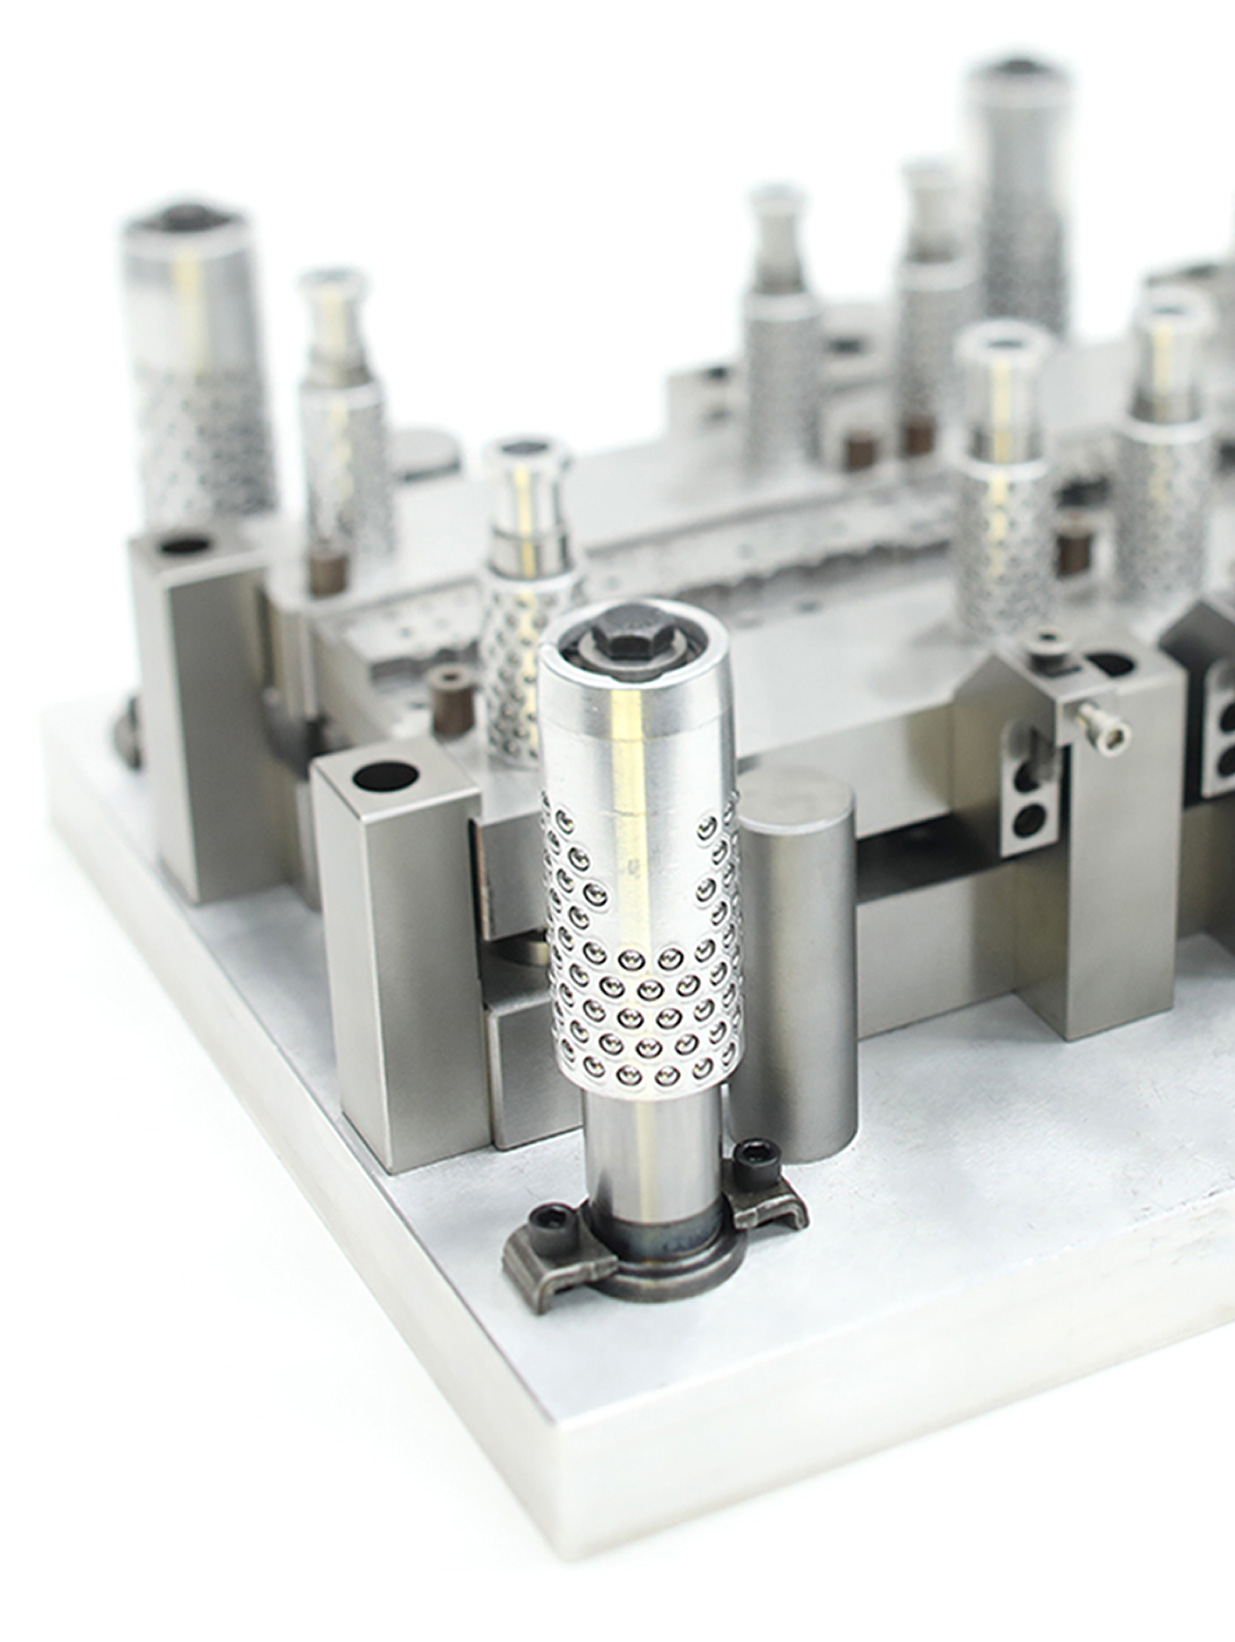 IntriPlex tool and die for precision forming